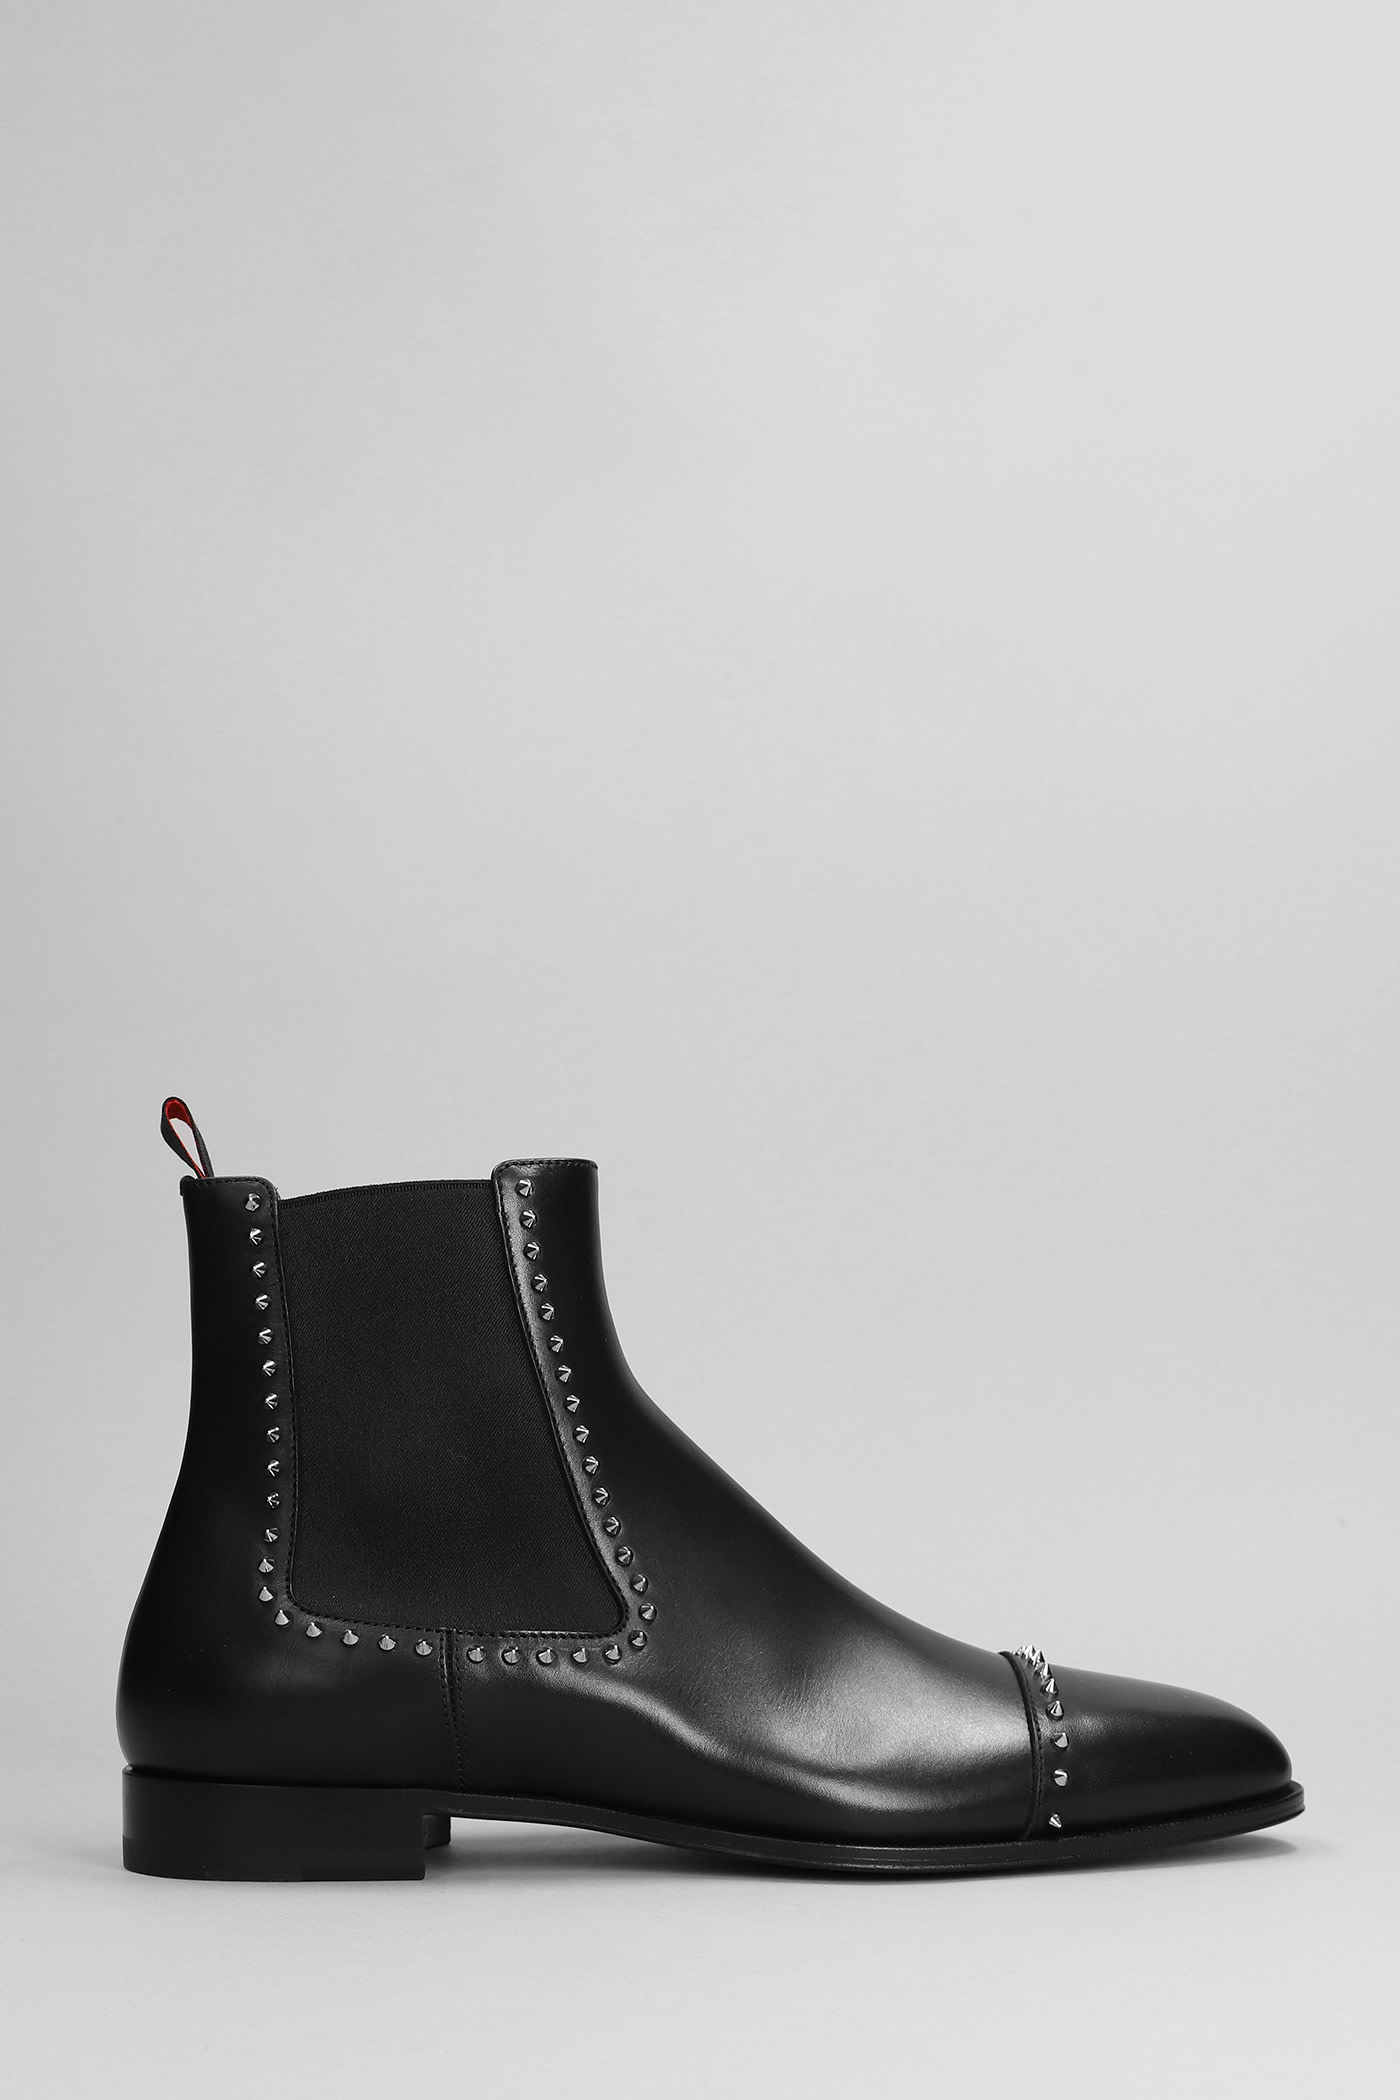 CHRISTIAN LOUBOUTIN CHELSEA CLOO ANKLE BOOTS IN BLACK LEATHER